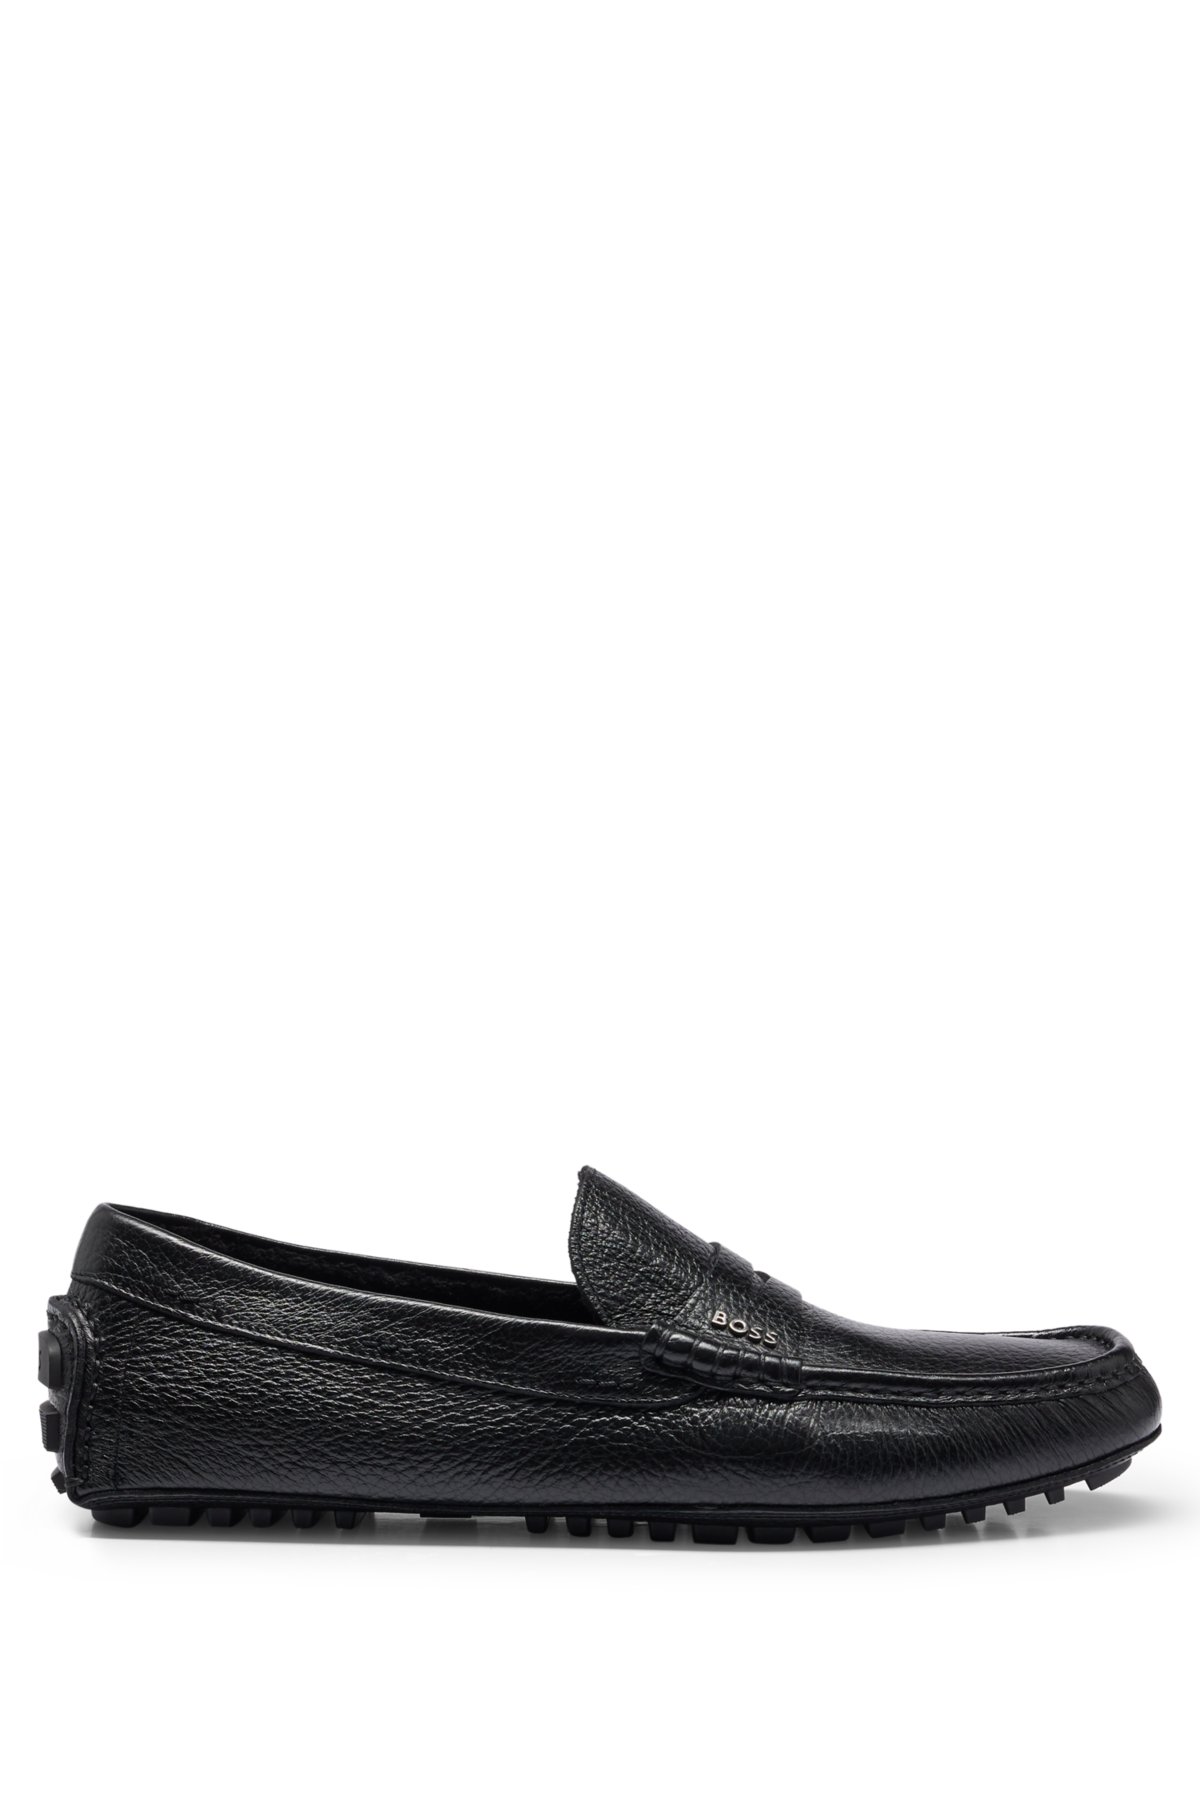 BOSS - Italian-made moccasins in grained leather with logo trim